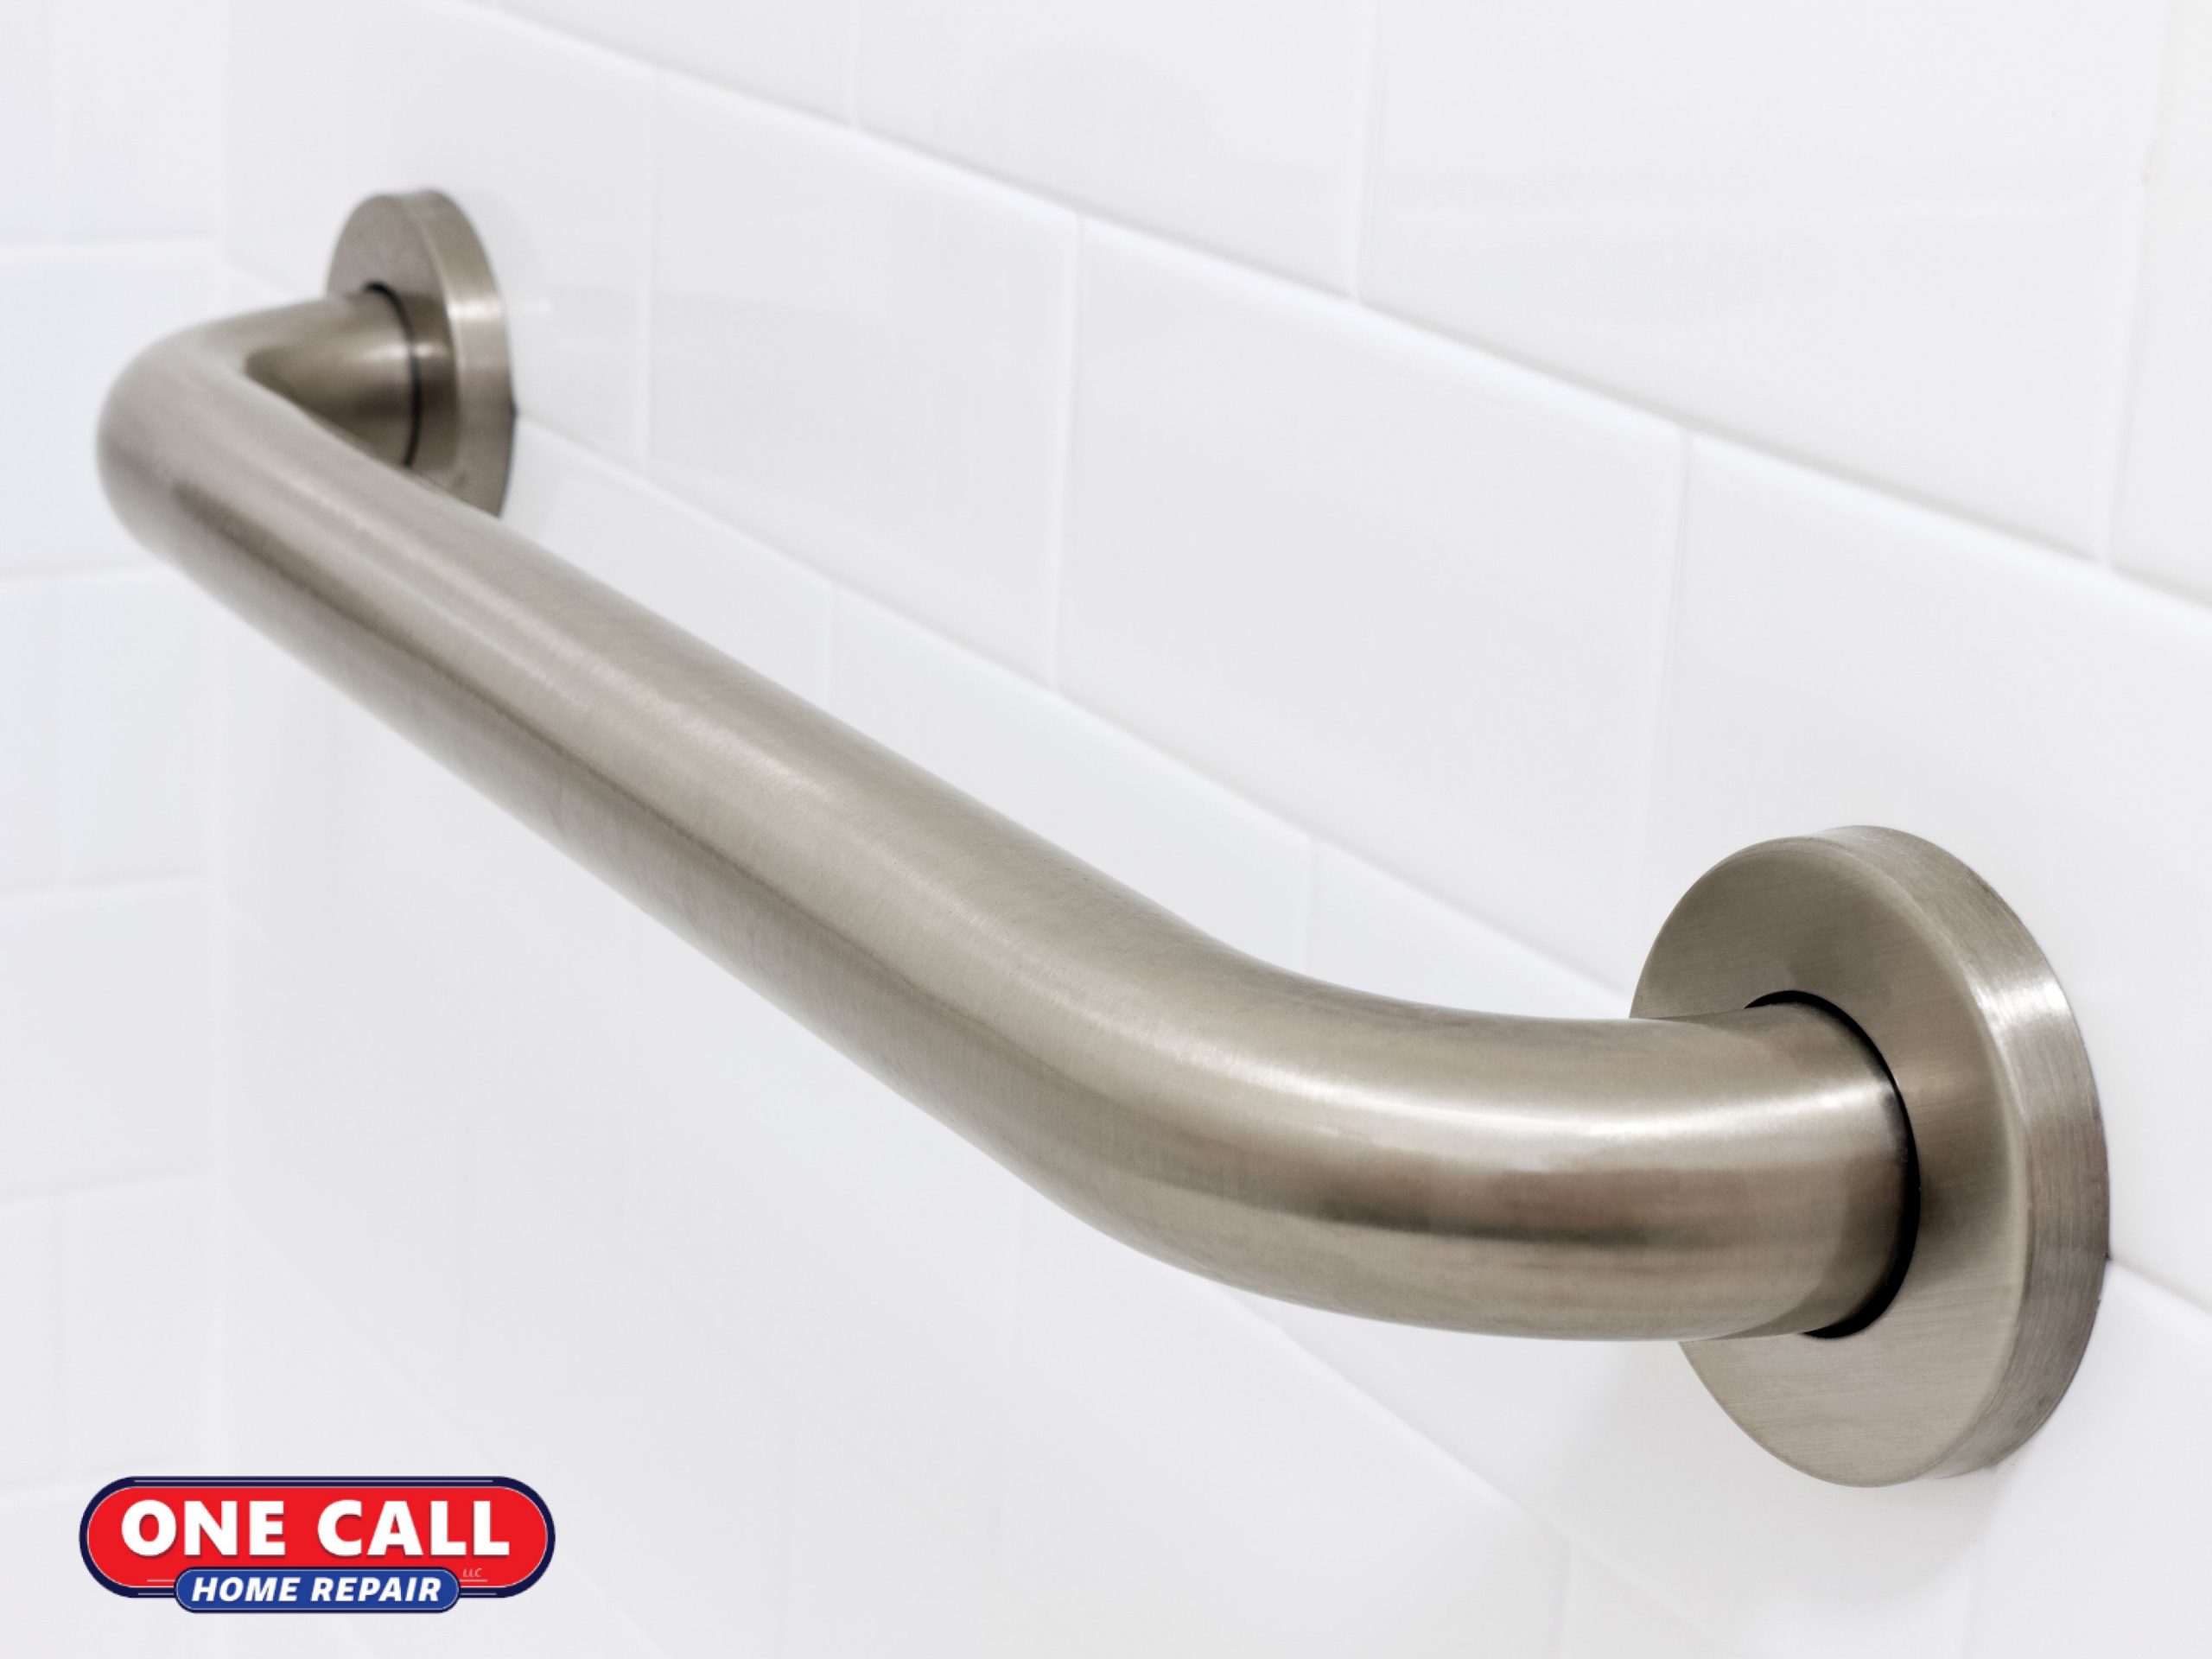 Make Your Home Handicap Accessible with Grab Bars and Handrails